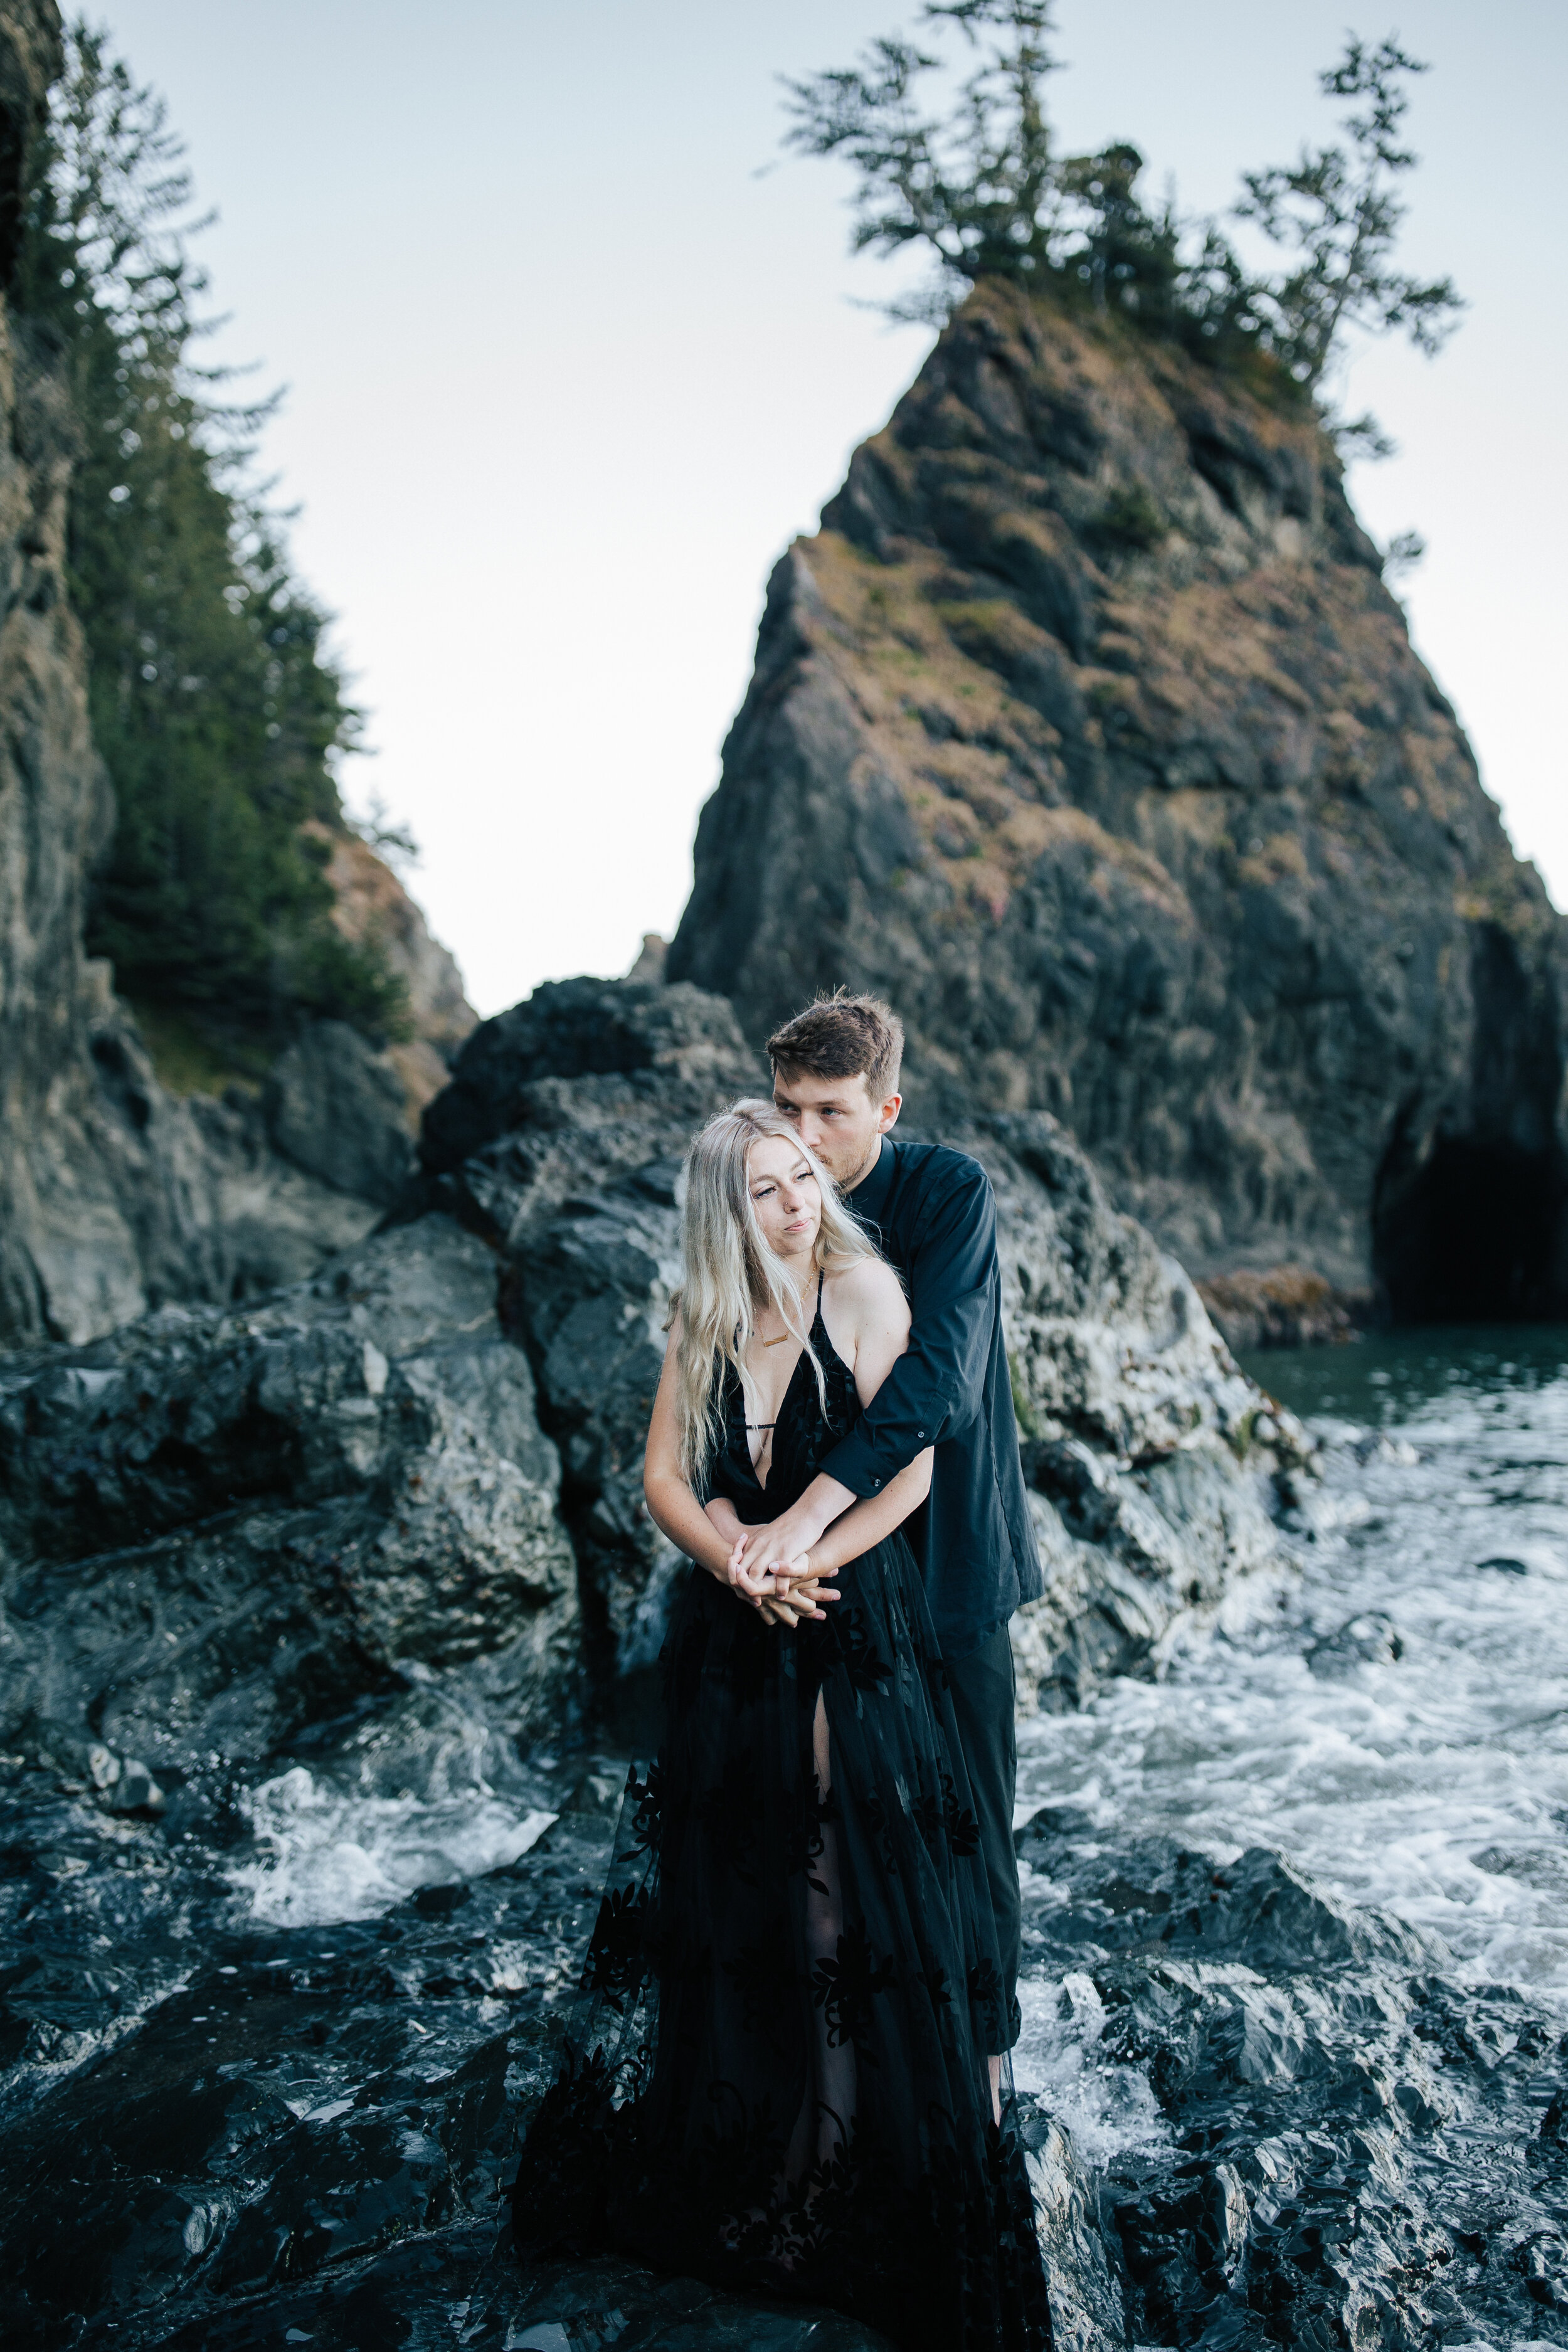  Samuel H Boardman Scenic Corridor southern Oregon coast elopement bride and groom saying their vows on a cliff on the Oregon coast with sea stacks and the ocean below black bridal gown couple in all black a groom walks with his new bride #oregonphot